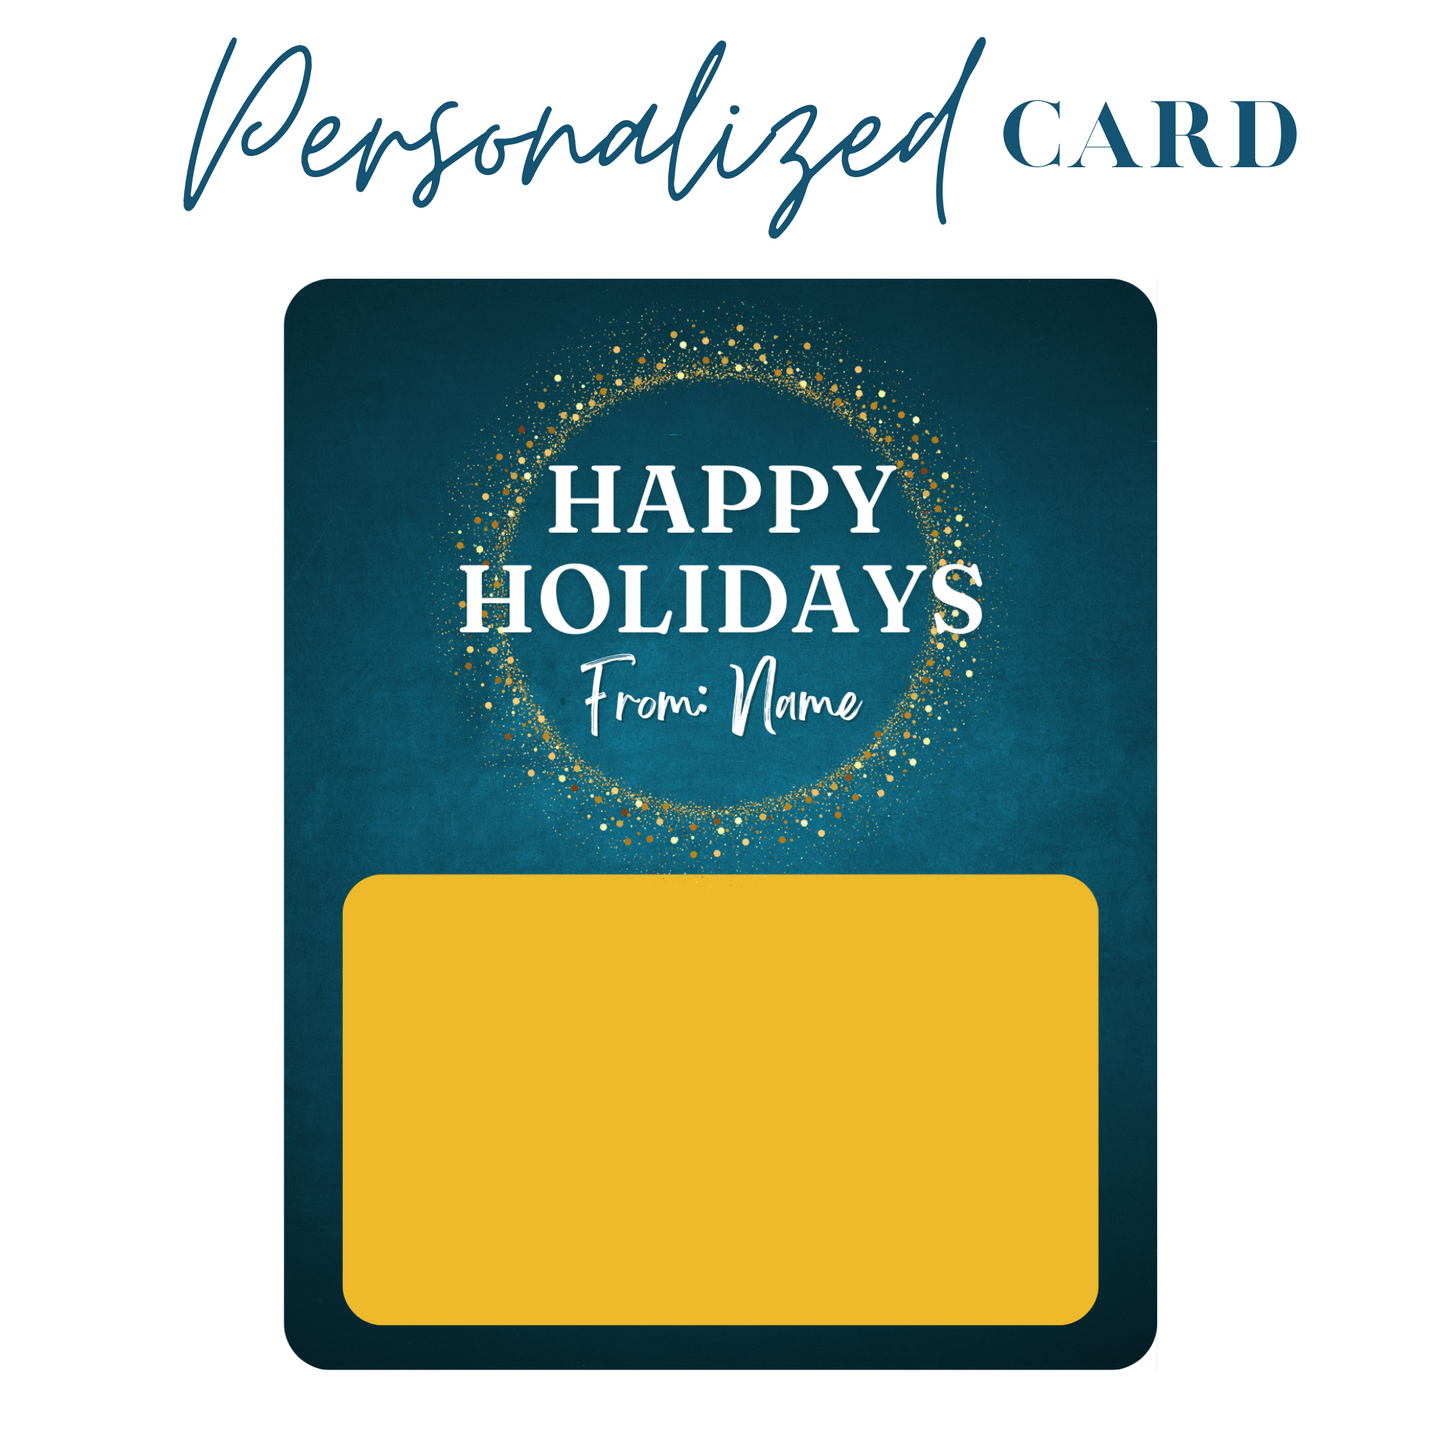 Gold Happy Holidays Gift Card holder greeting card